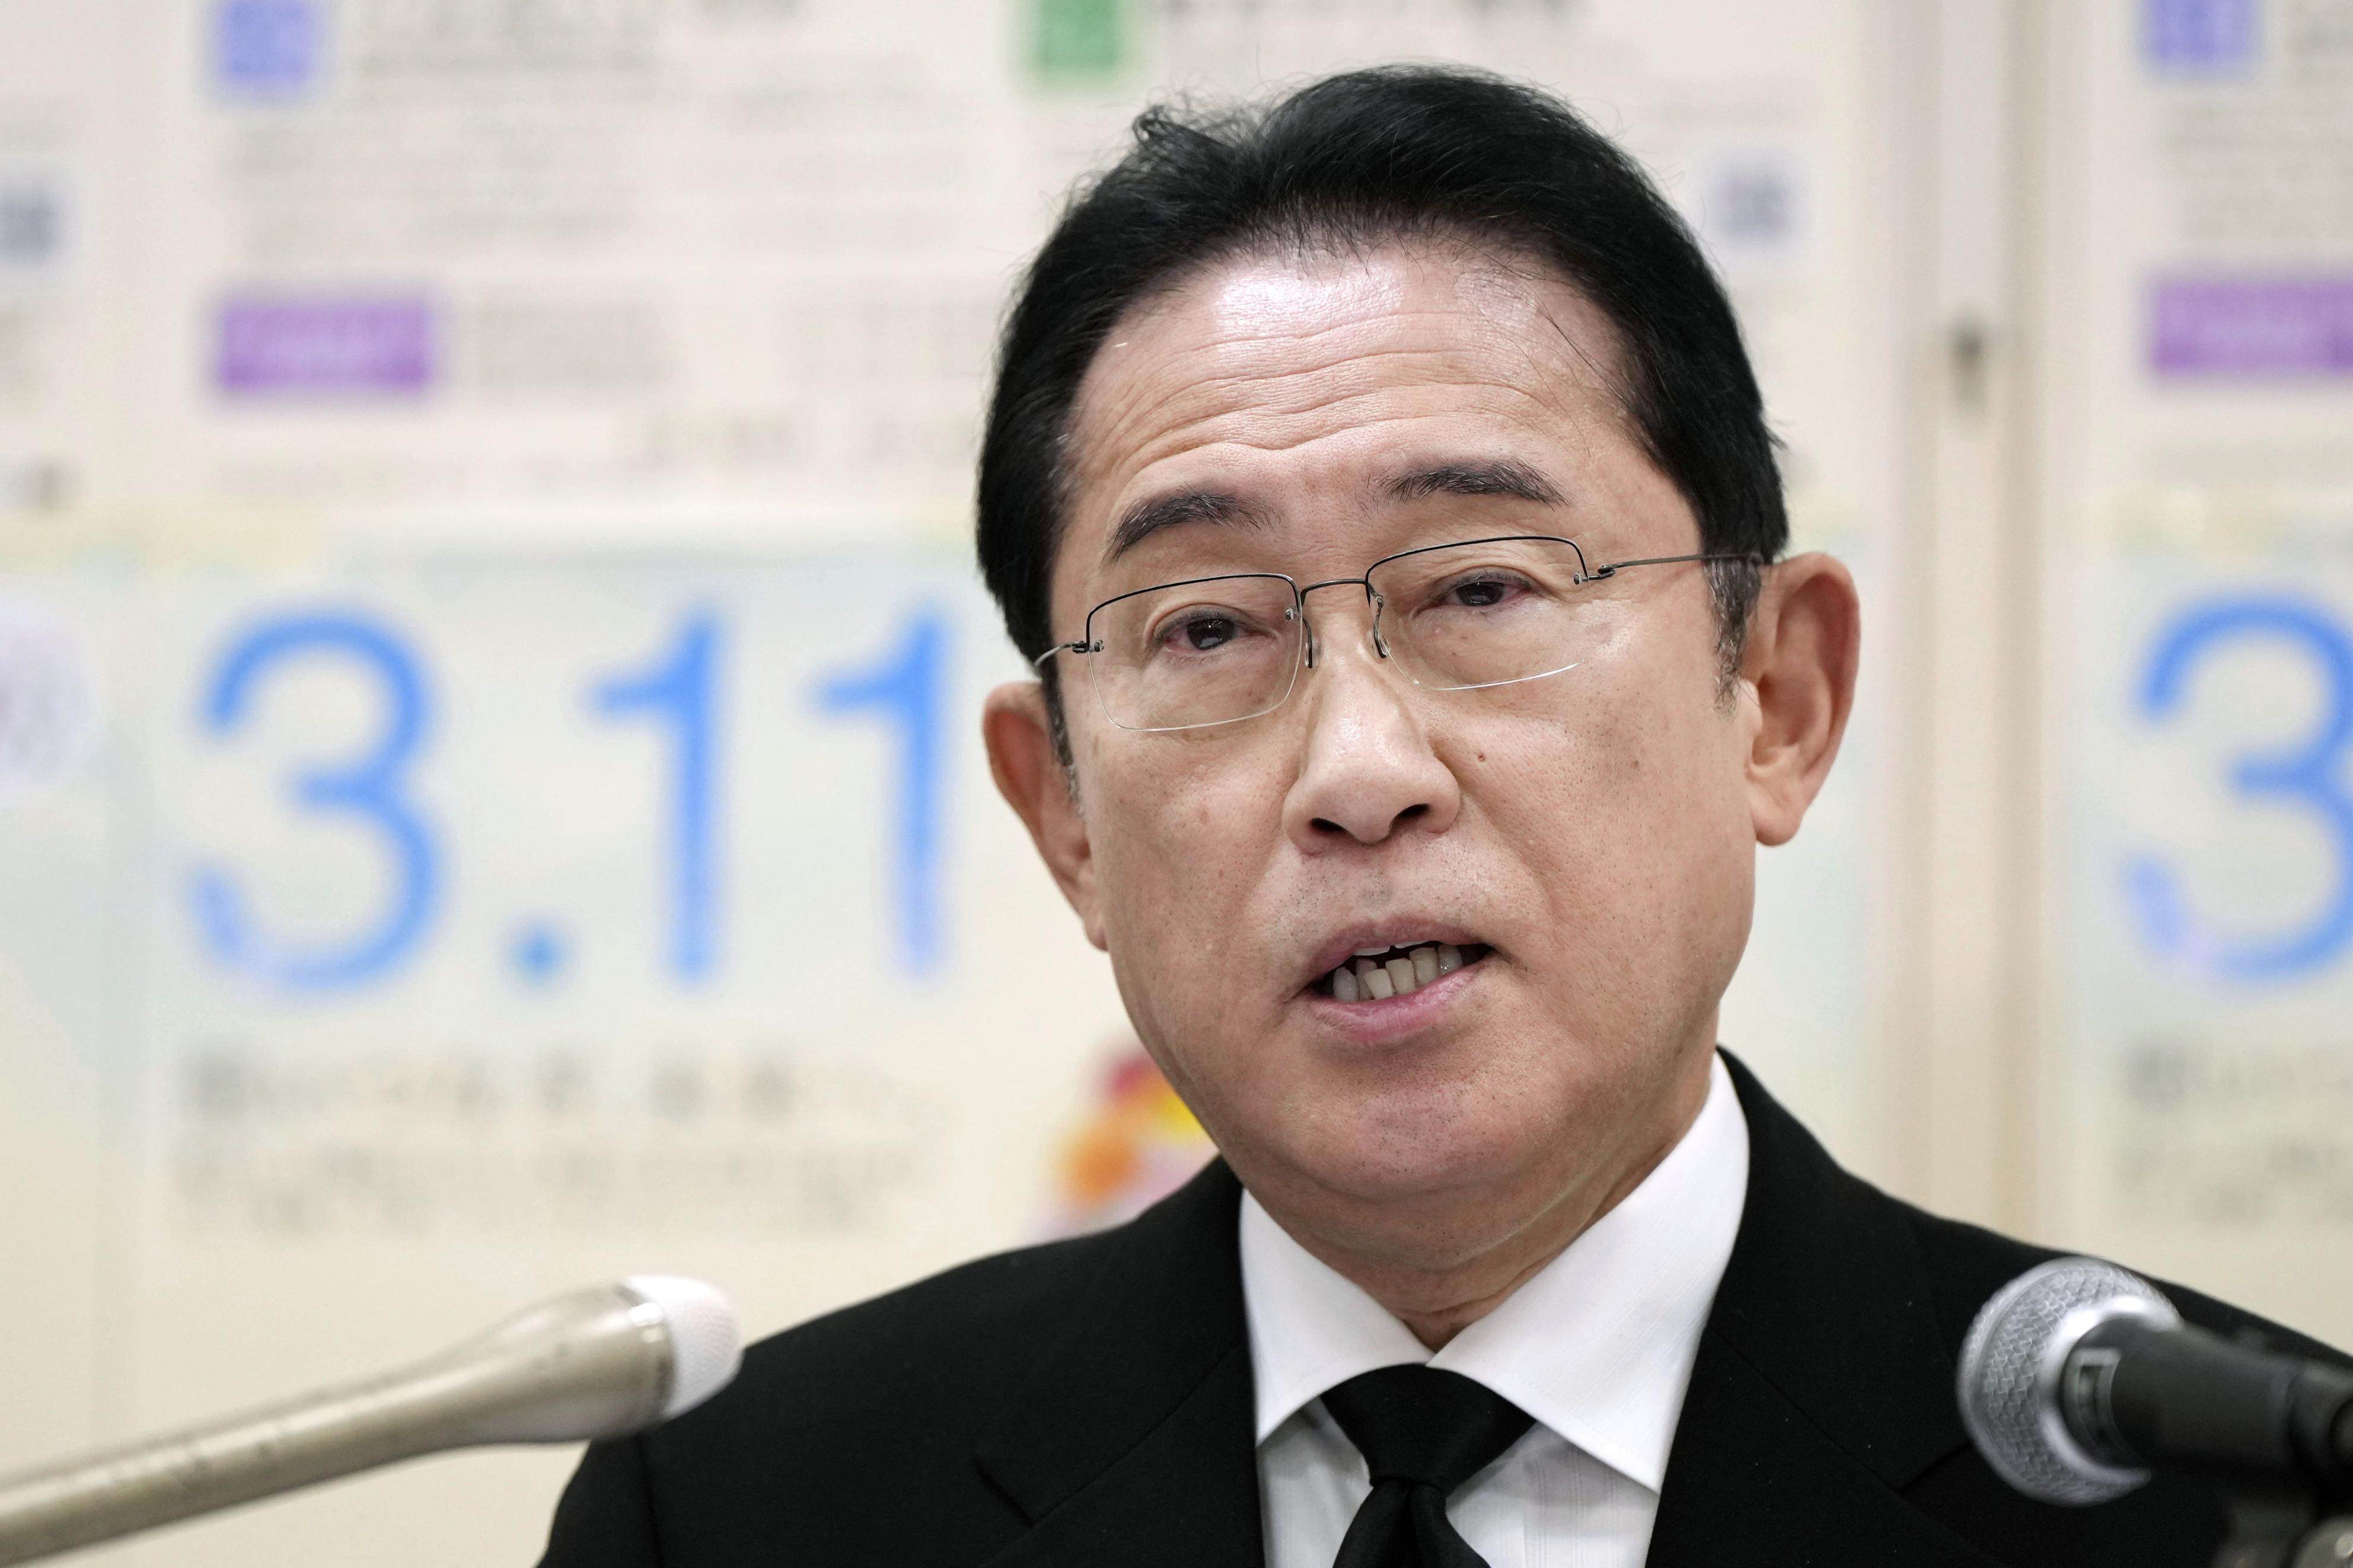 Japan’s ruling LDP is facing another crisis after reports of junior members of the party attending a party involving “go-go dancing”. Photo: Kyodo